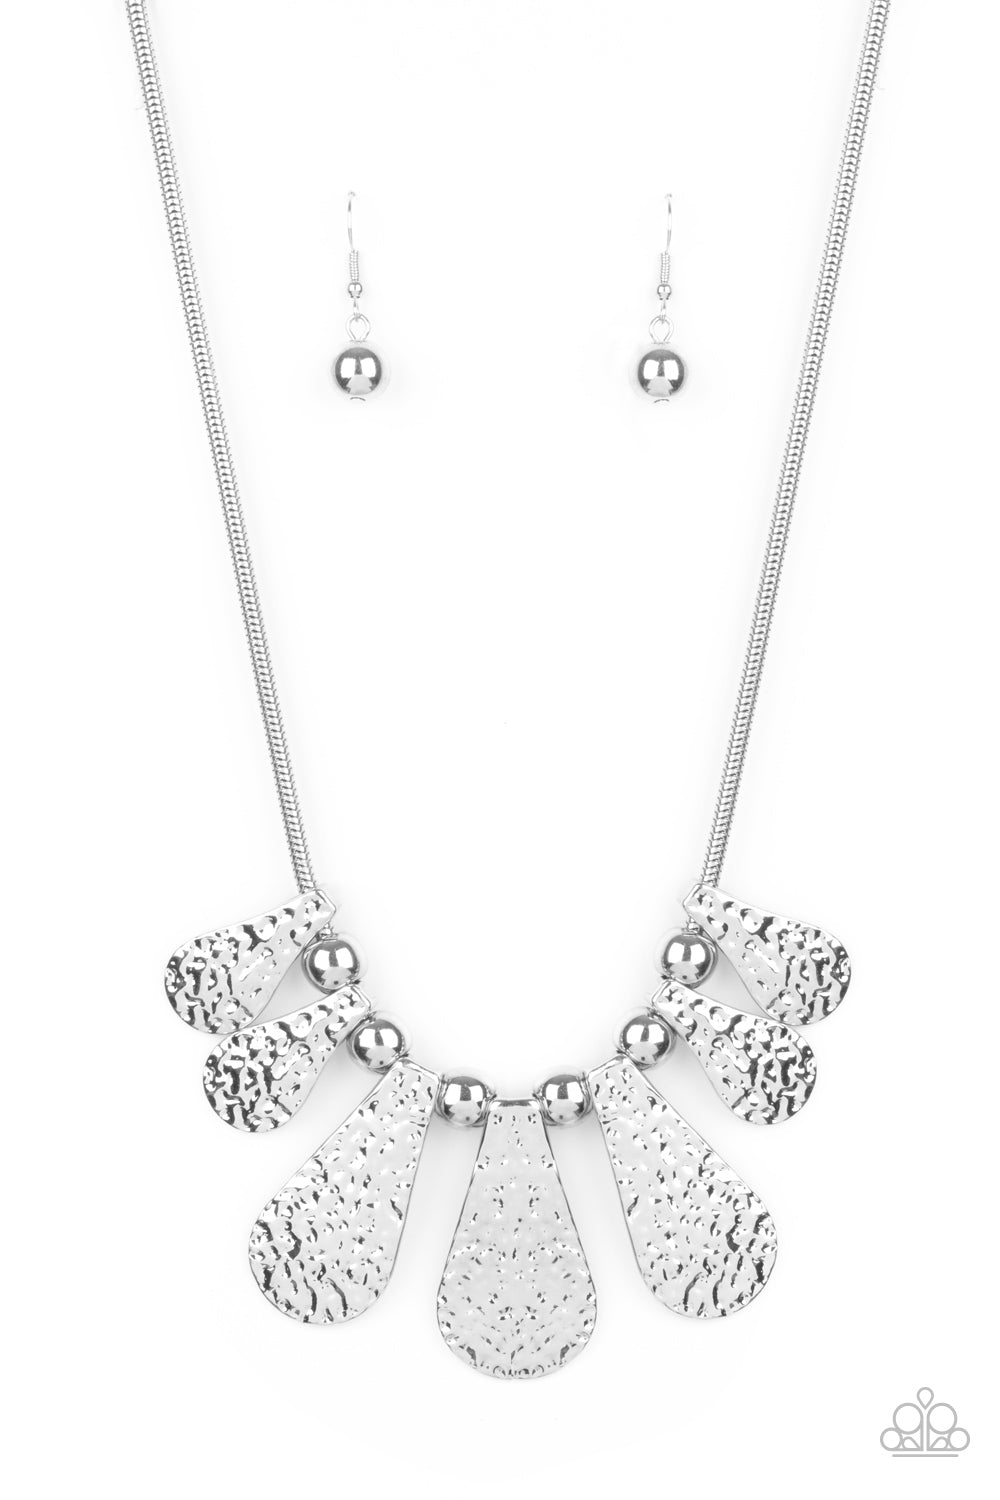 Gallery Goddess - silver - Paparazzi necklace